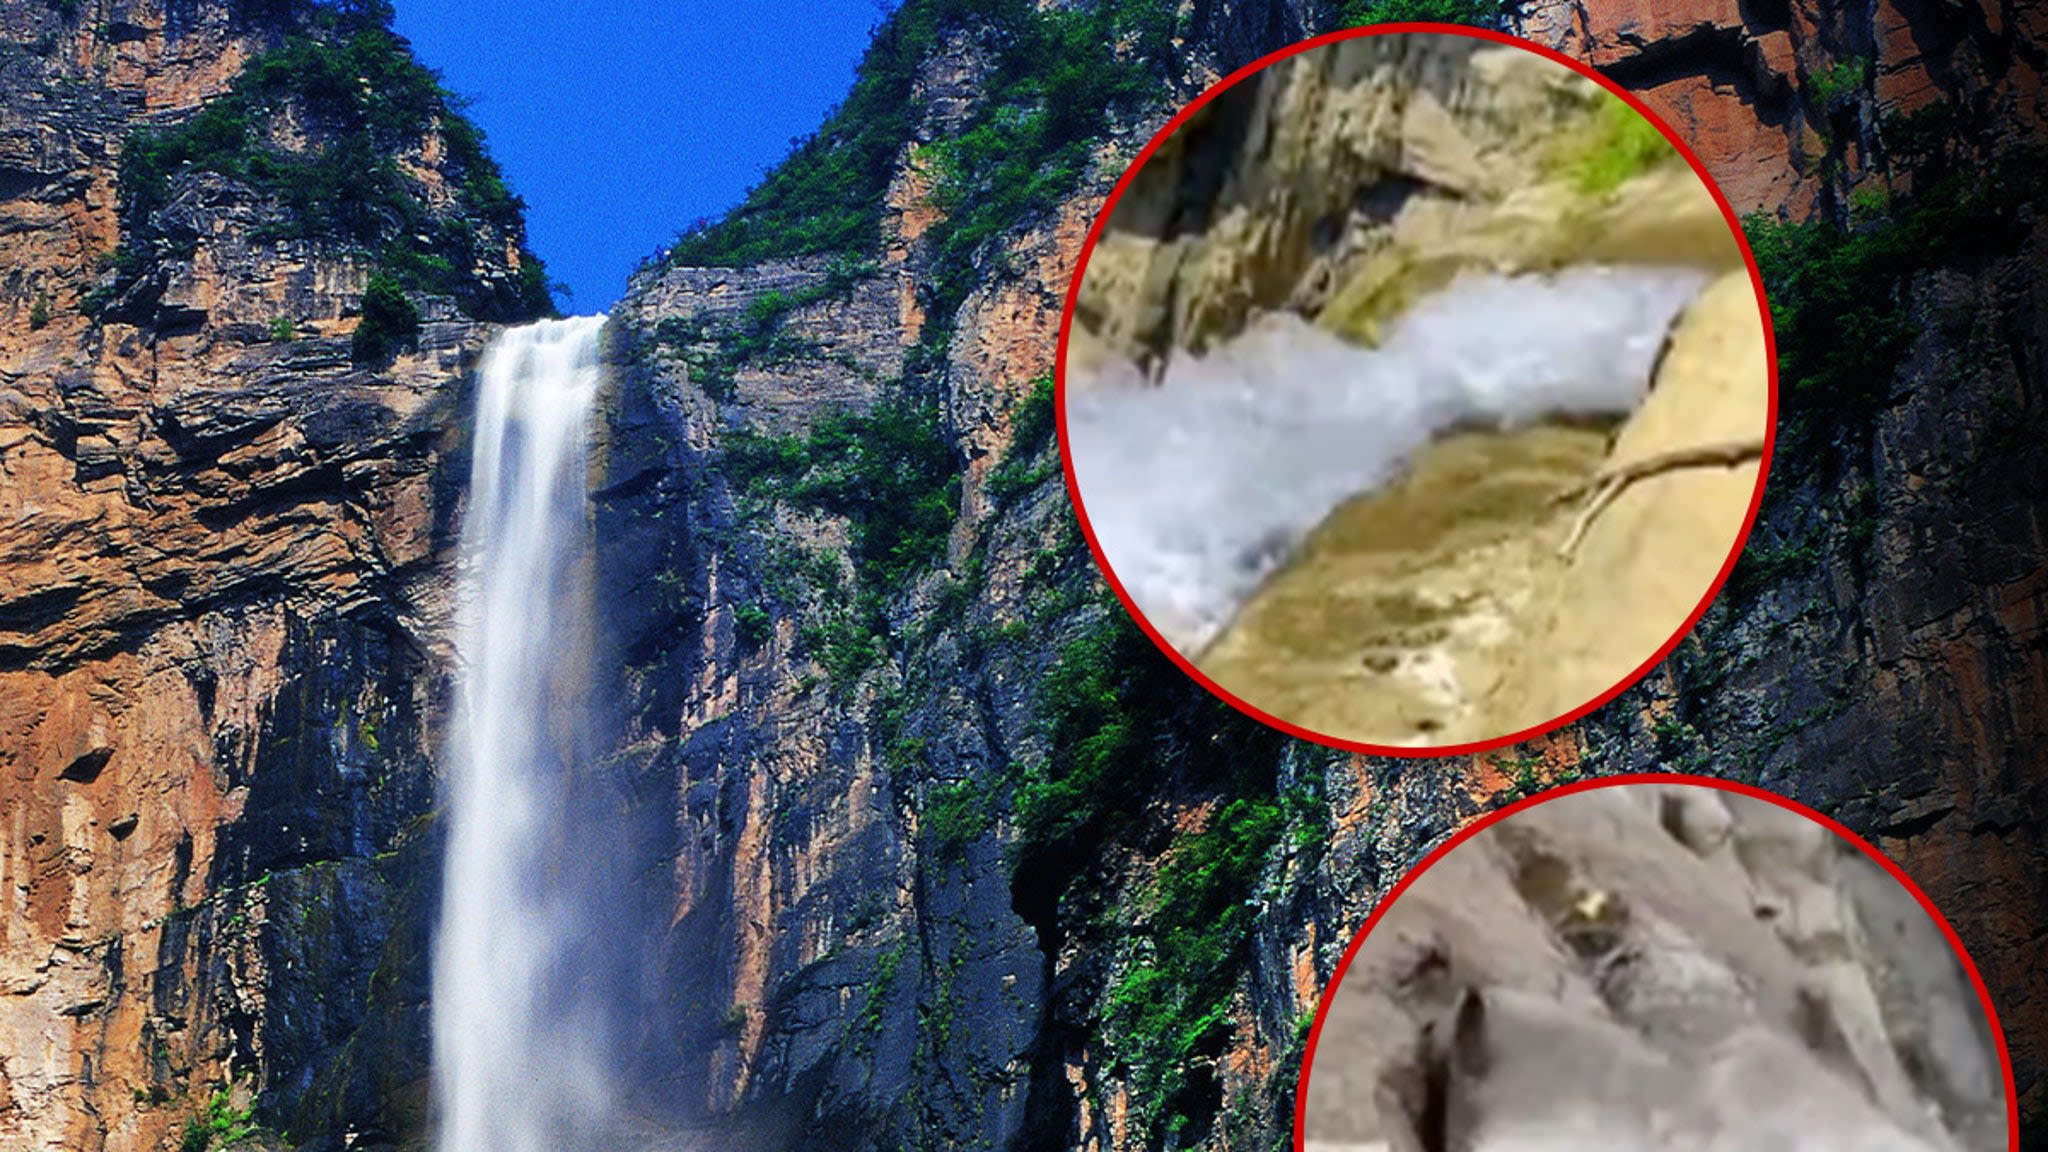 Famous Chinese Waterfall Deemed Fake, Water Pumping Pipes Exposed